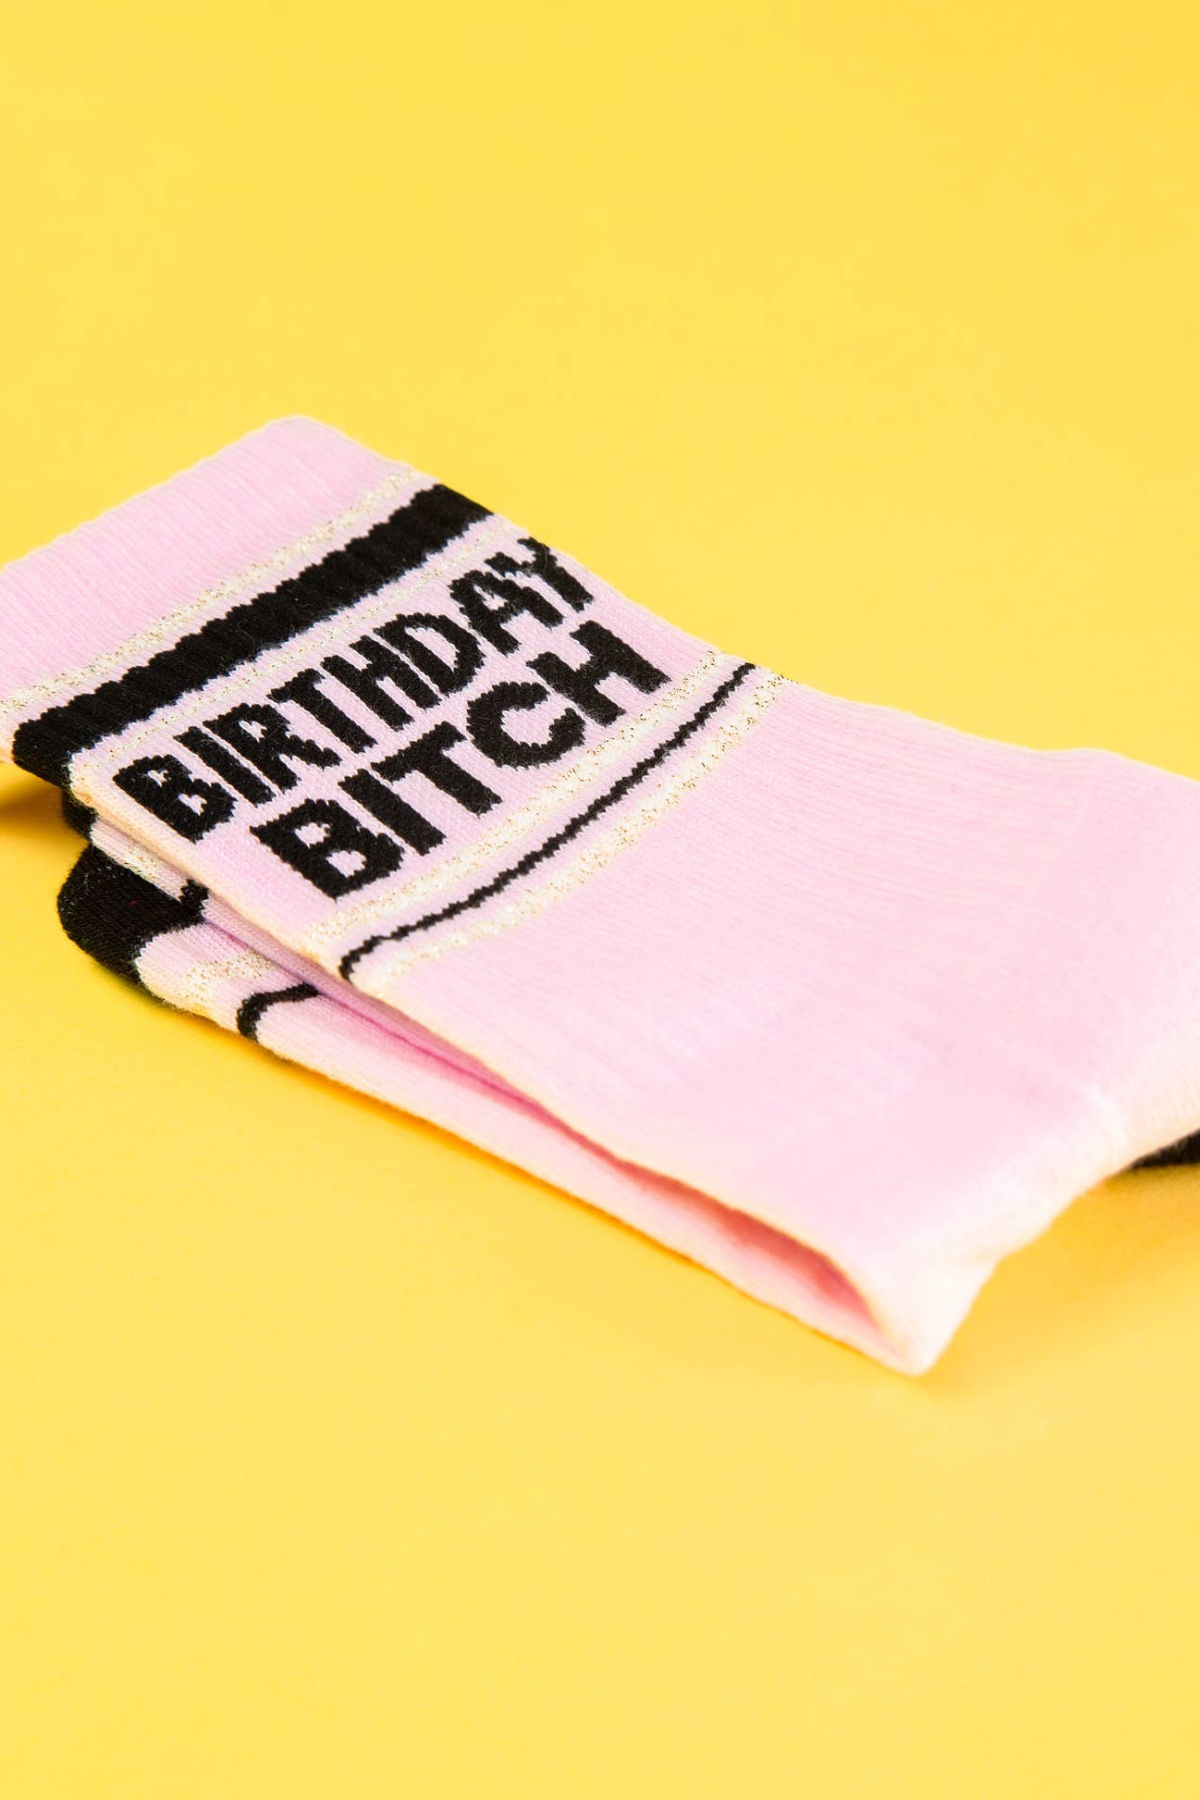 Birthday Bitch Socks, Essentials Acc by Gumball Poodle | LIT Boutique